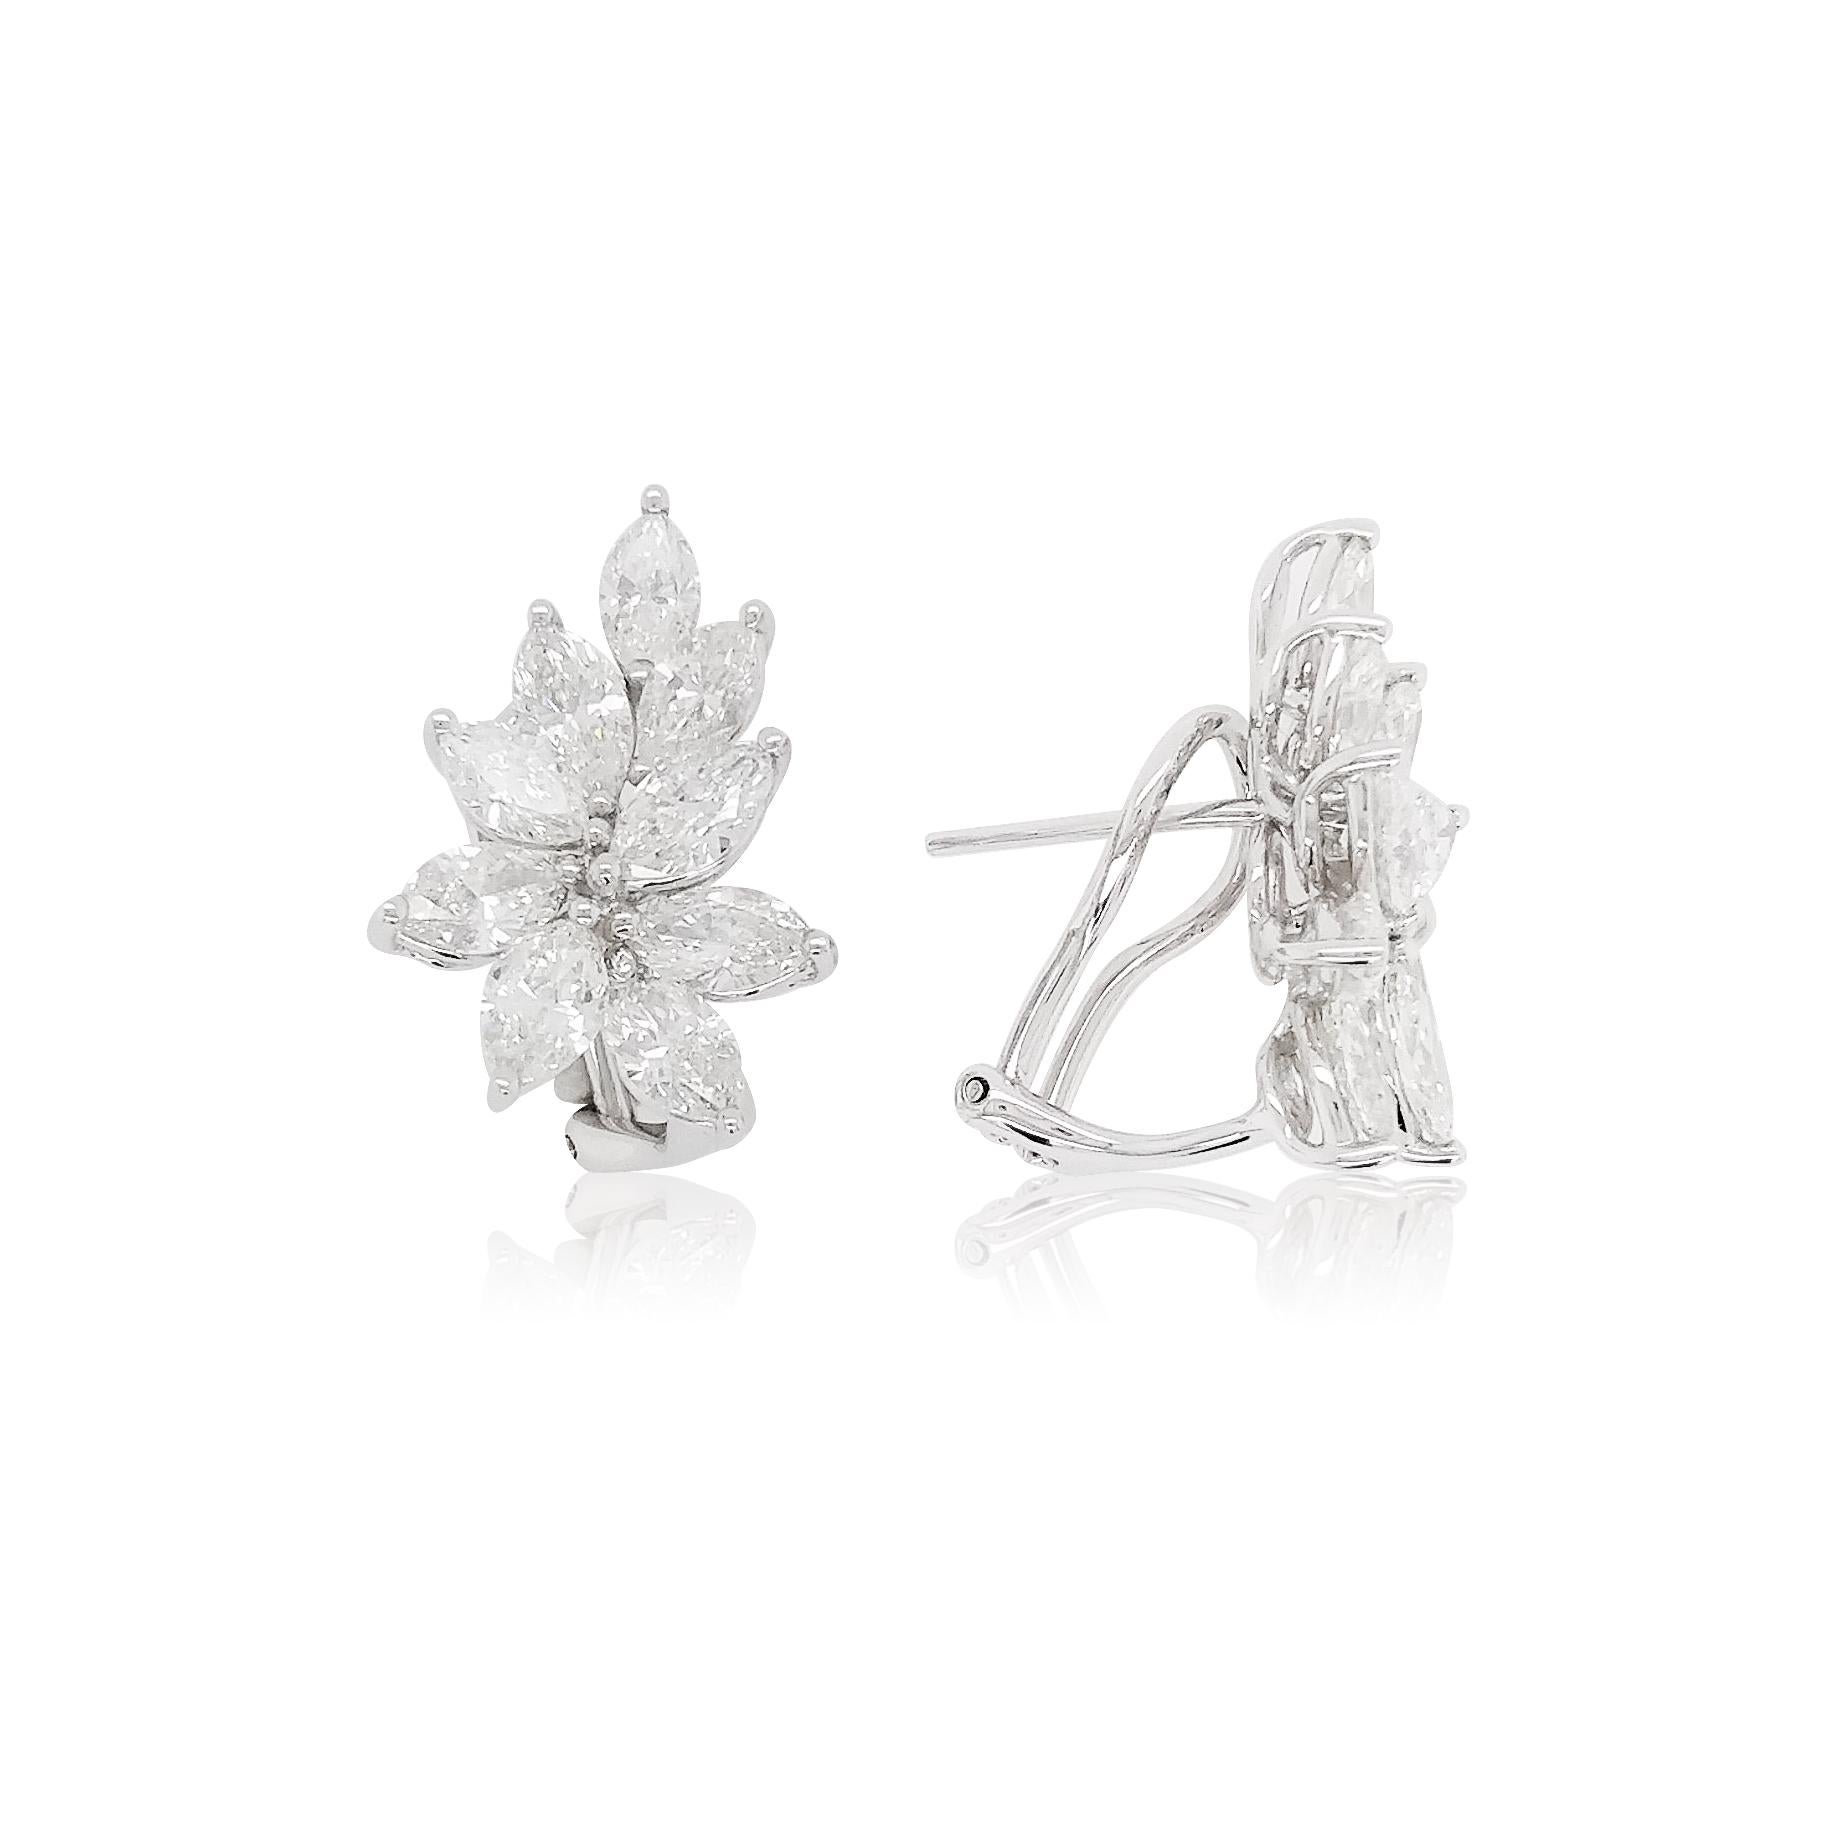 These scintillating earrings feature high-quality lustrous marquise shape natural White Diamonds. Each diamond is matched perfectly by experts. These spectacular earrings will add the perfect finishing touch to any outfit.
-	Marquise shape natural